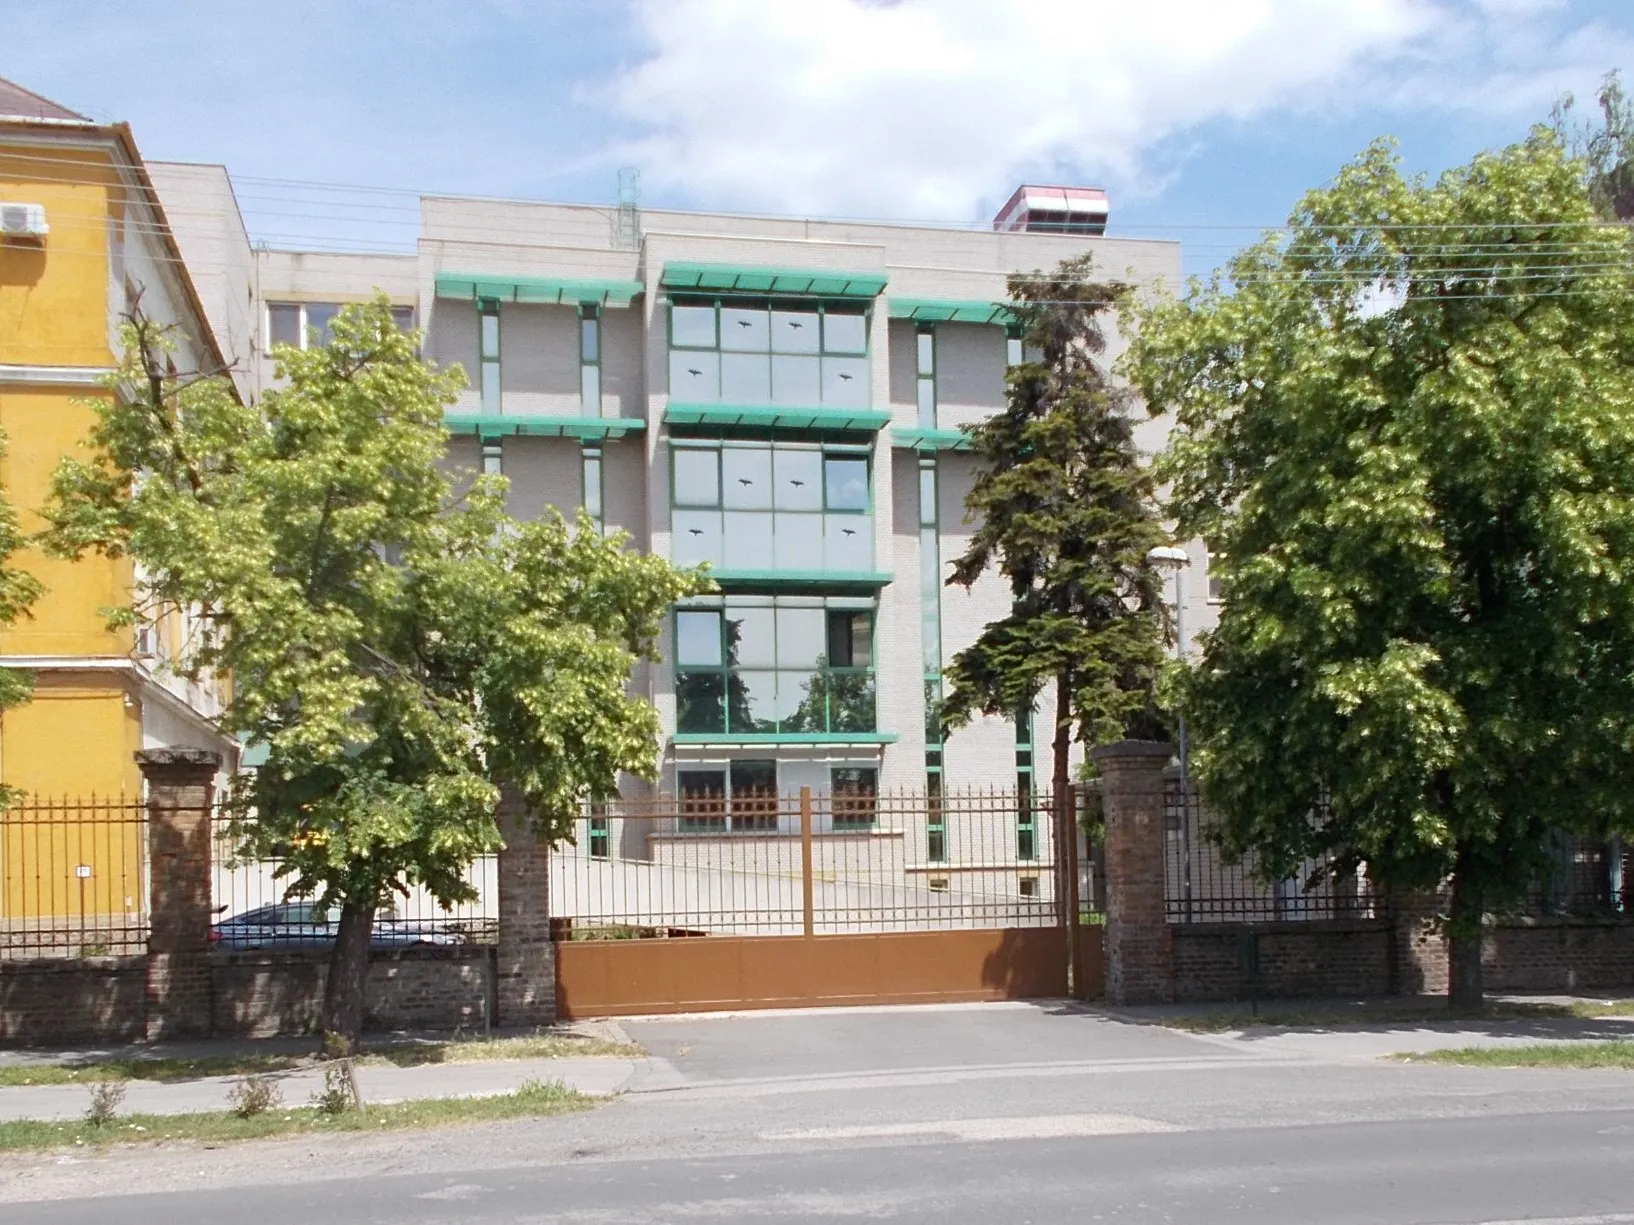 Photo showing: Gyula Hospital from Szent István Street. Official name since 2016: ~~Kálmán Pándy Member Hospital of the Hospital Békés County Central Hospital other/short name Kálmán Pándy Member Hospital or Kálmán Pándy County Hospital. The oldest part of the hospital on Semmelweis Street,-since 1840 hospital building,-signed with plaque. The washing building (built in the end of the 19th cent.) and the hospital chapel (early 20th century) are local grade listed monuments. There are a couple sculptures in between buildings and plaque-reliefs are building inside. There is a sizeable mushroom shaped water tower and a rooftop heliport (fifth grade) too. - 1 Semmelweis Street, bordered by/ or between Dob Street and Szent István Street, Magyarváros (lit. Hungarian Town) neighborhood, Gyula, Békés County, Hungary.